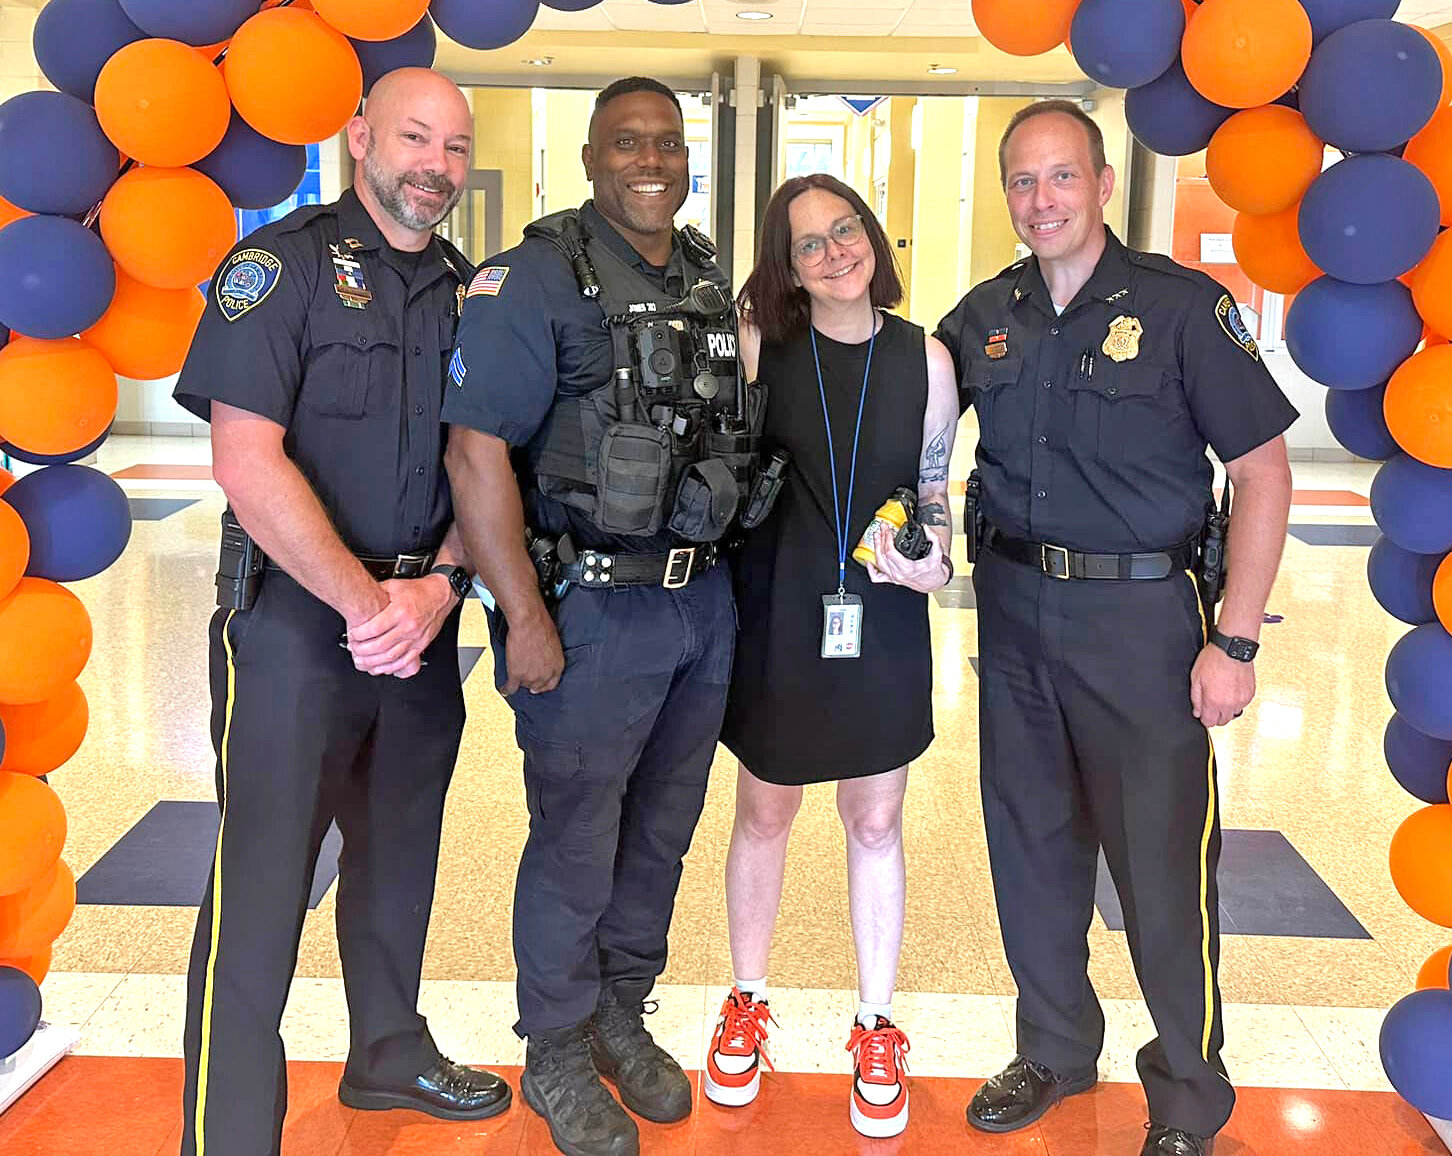 On Sept. 6, Cambridge Police Chief Justin Todd and Captain Shane Hinson wished Corporal Joe Jones good luck, as he began his duties as the new Mace’s Lane Middle School Resource Officer. From the left are Capt. Hinson, Cpl. Jones, Principal Patricia Prosser, and Chief Todd.